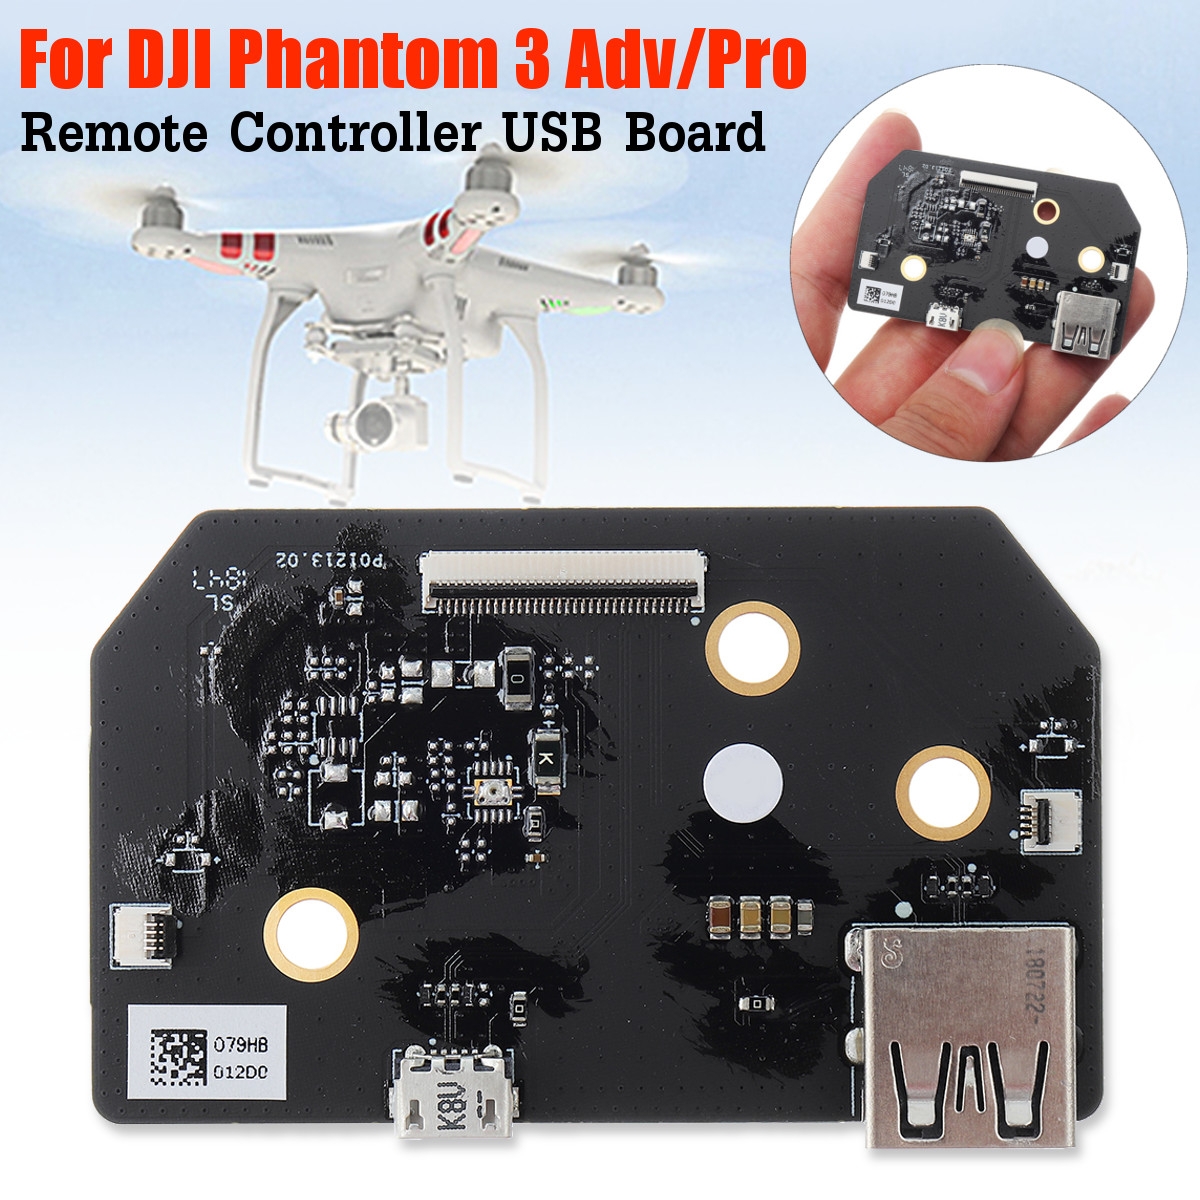 New USB Circuit Board RC Quadcopter Parts for DJI Phantom 3 Adv/Pro Remote Controller